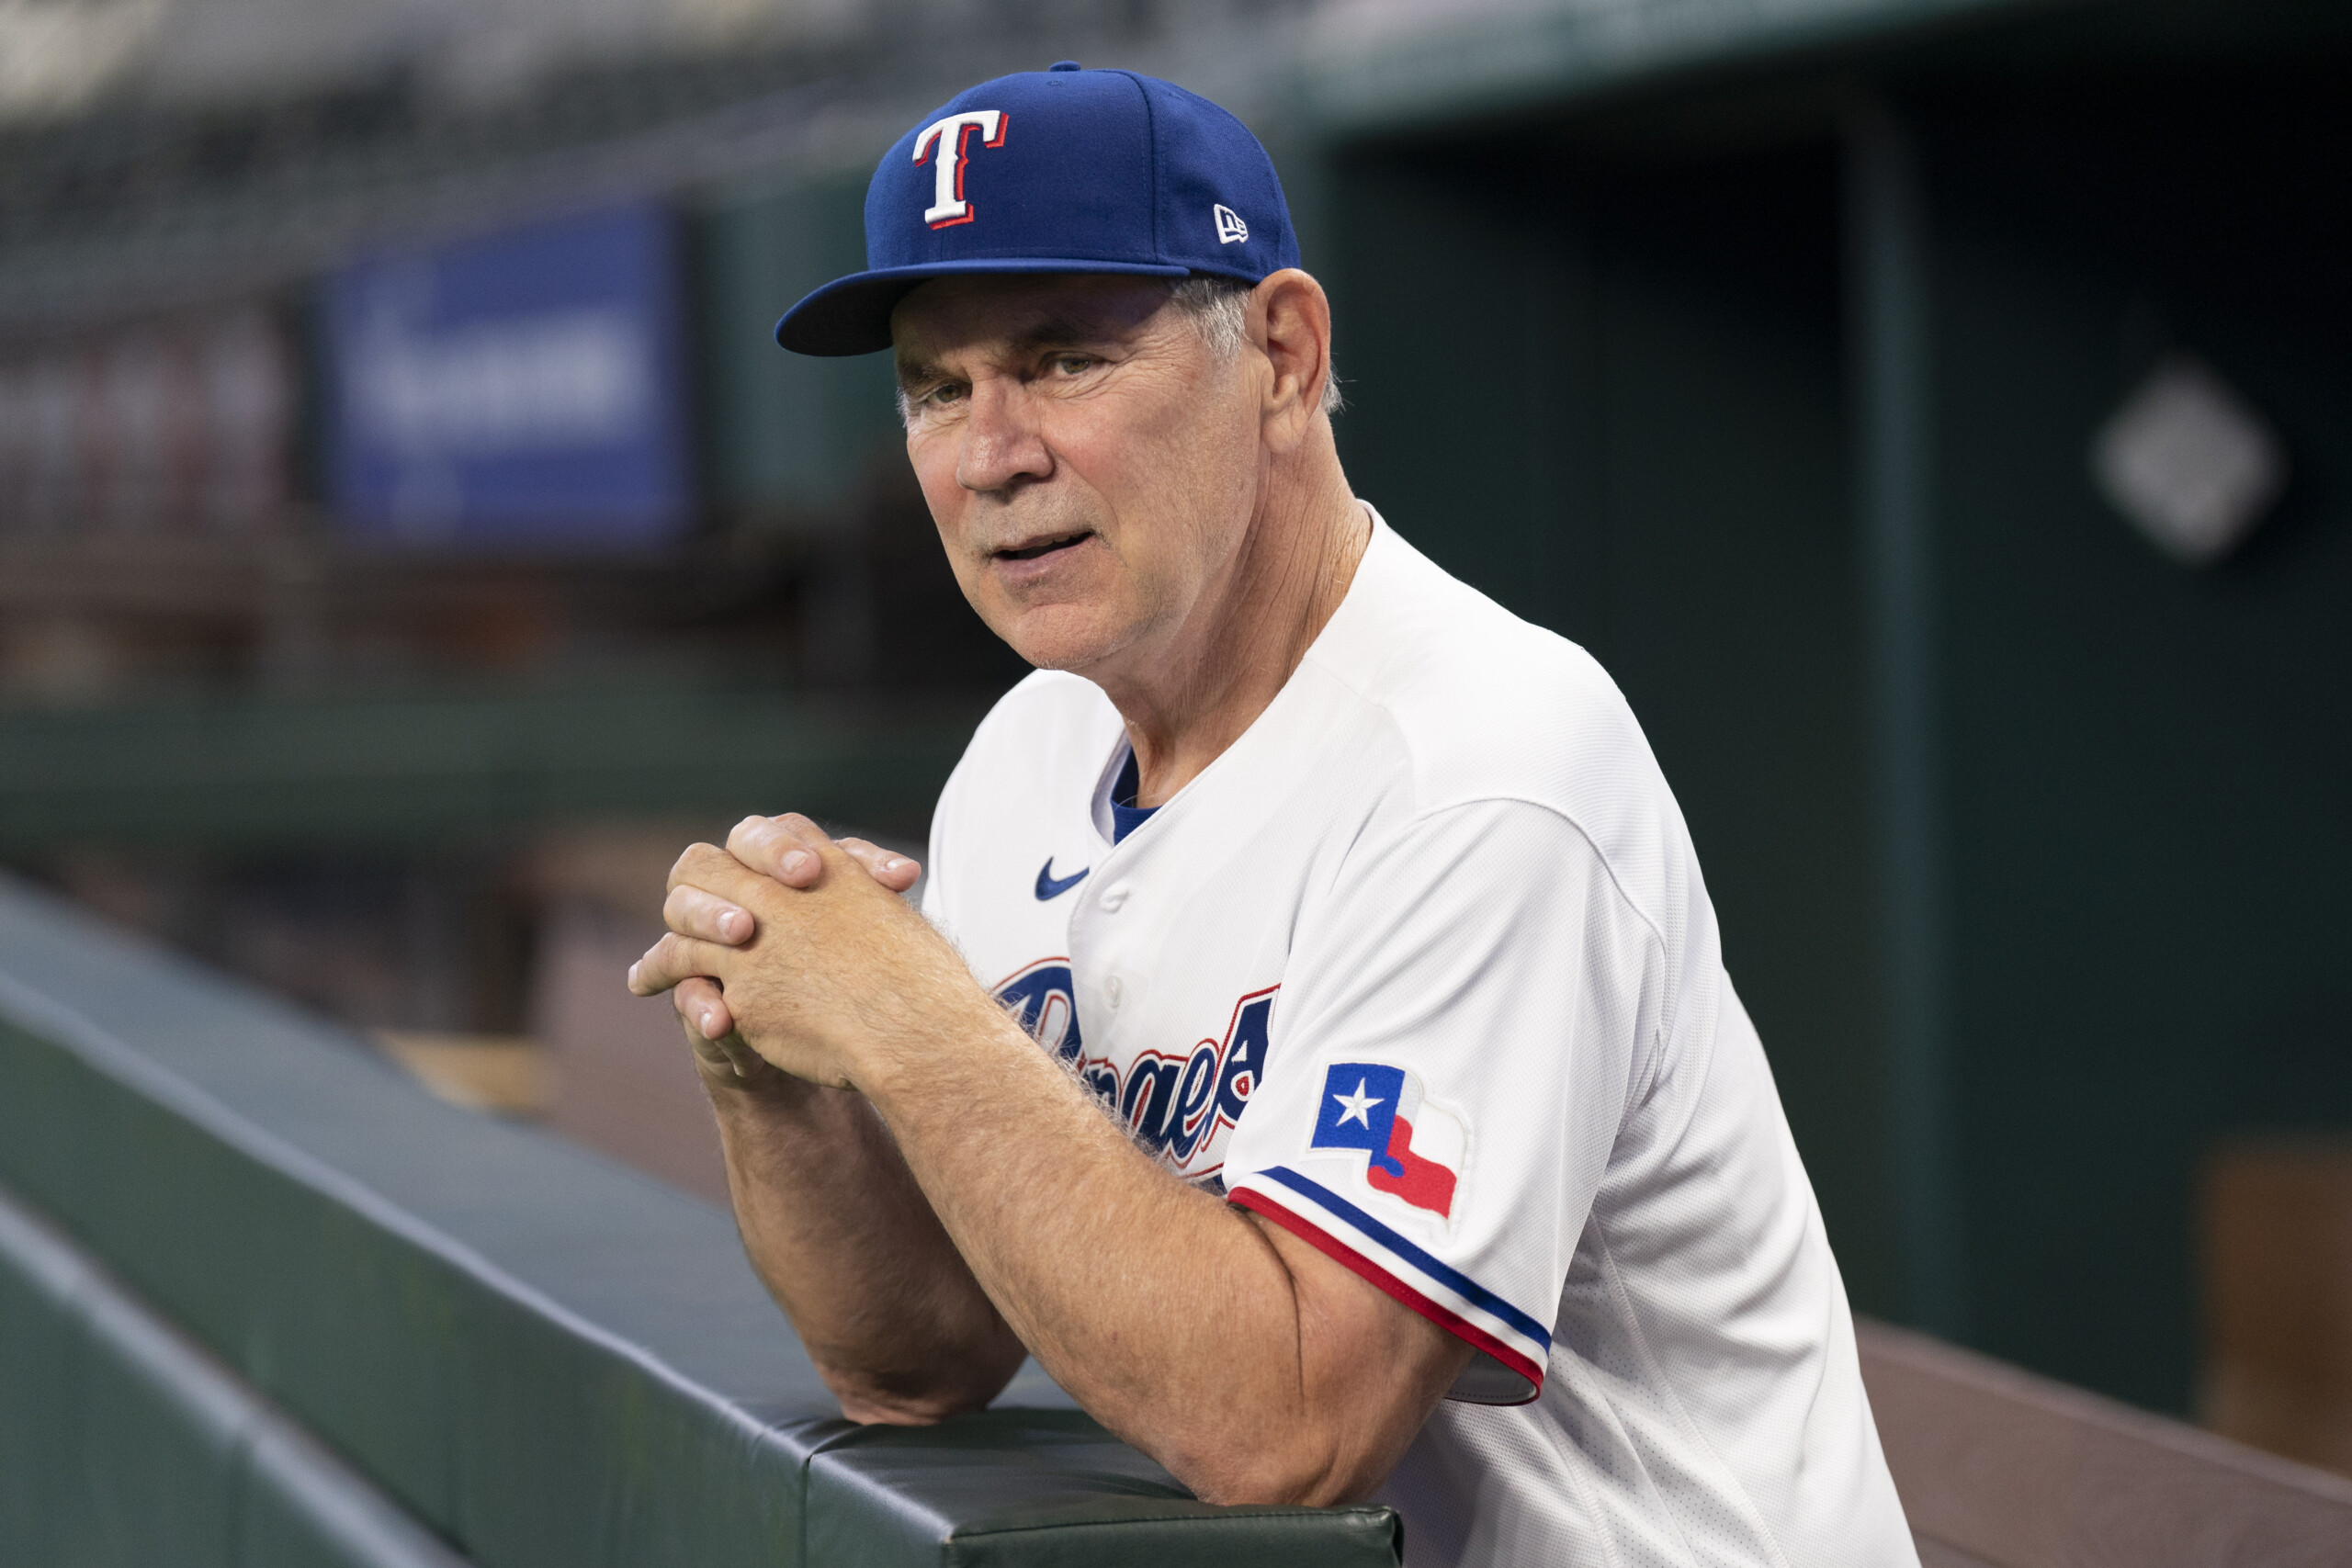 Rangers hire three-time World Series champion Bruce Bochy as next manager